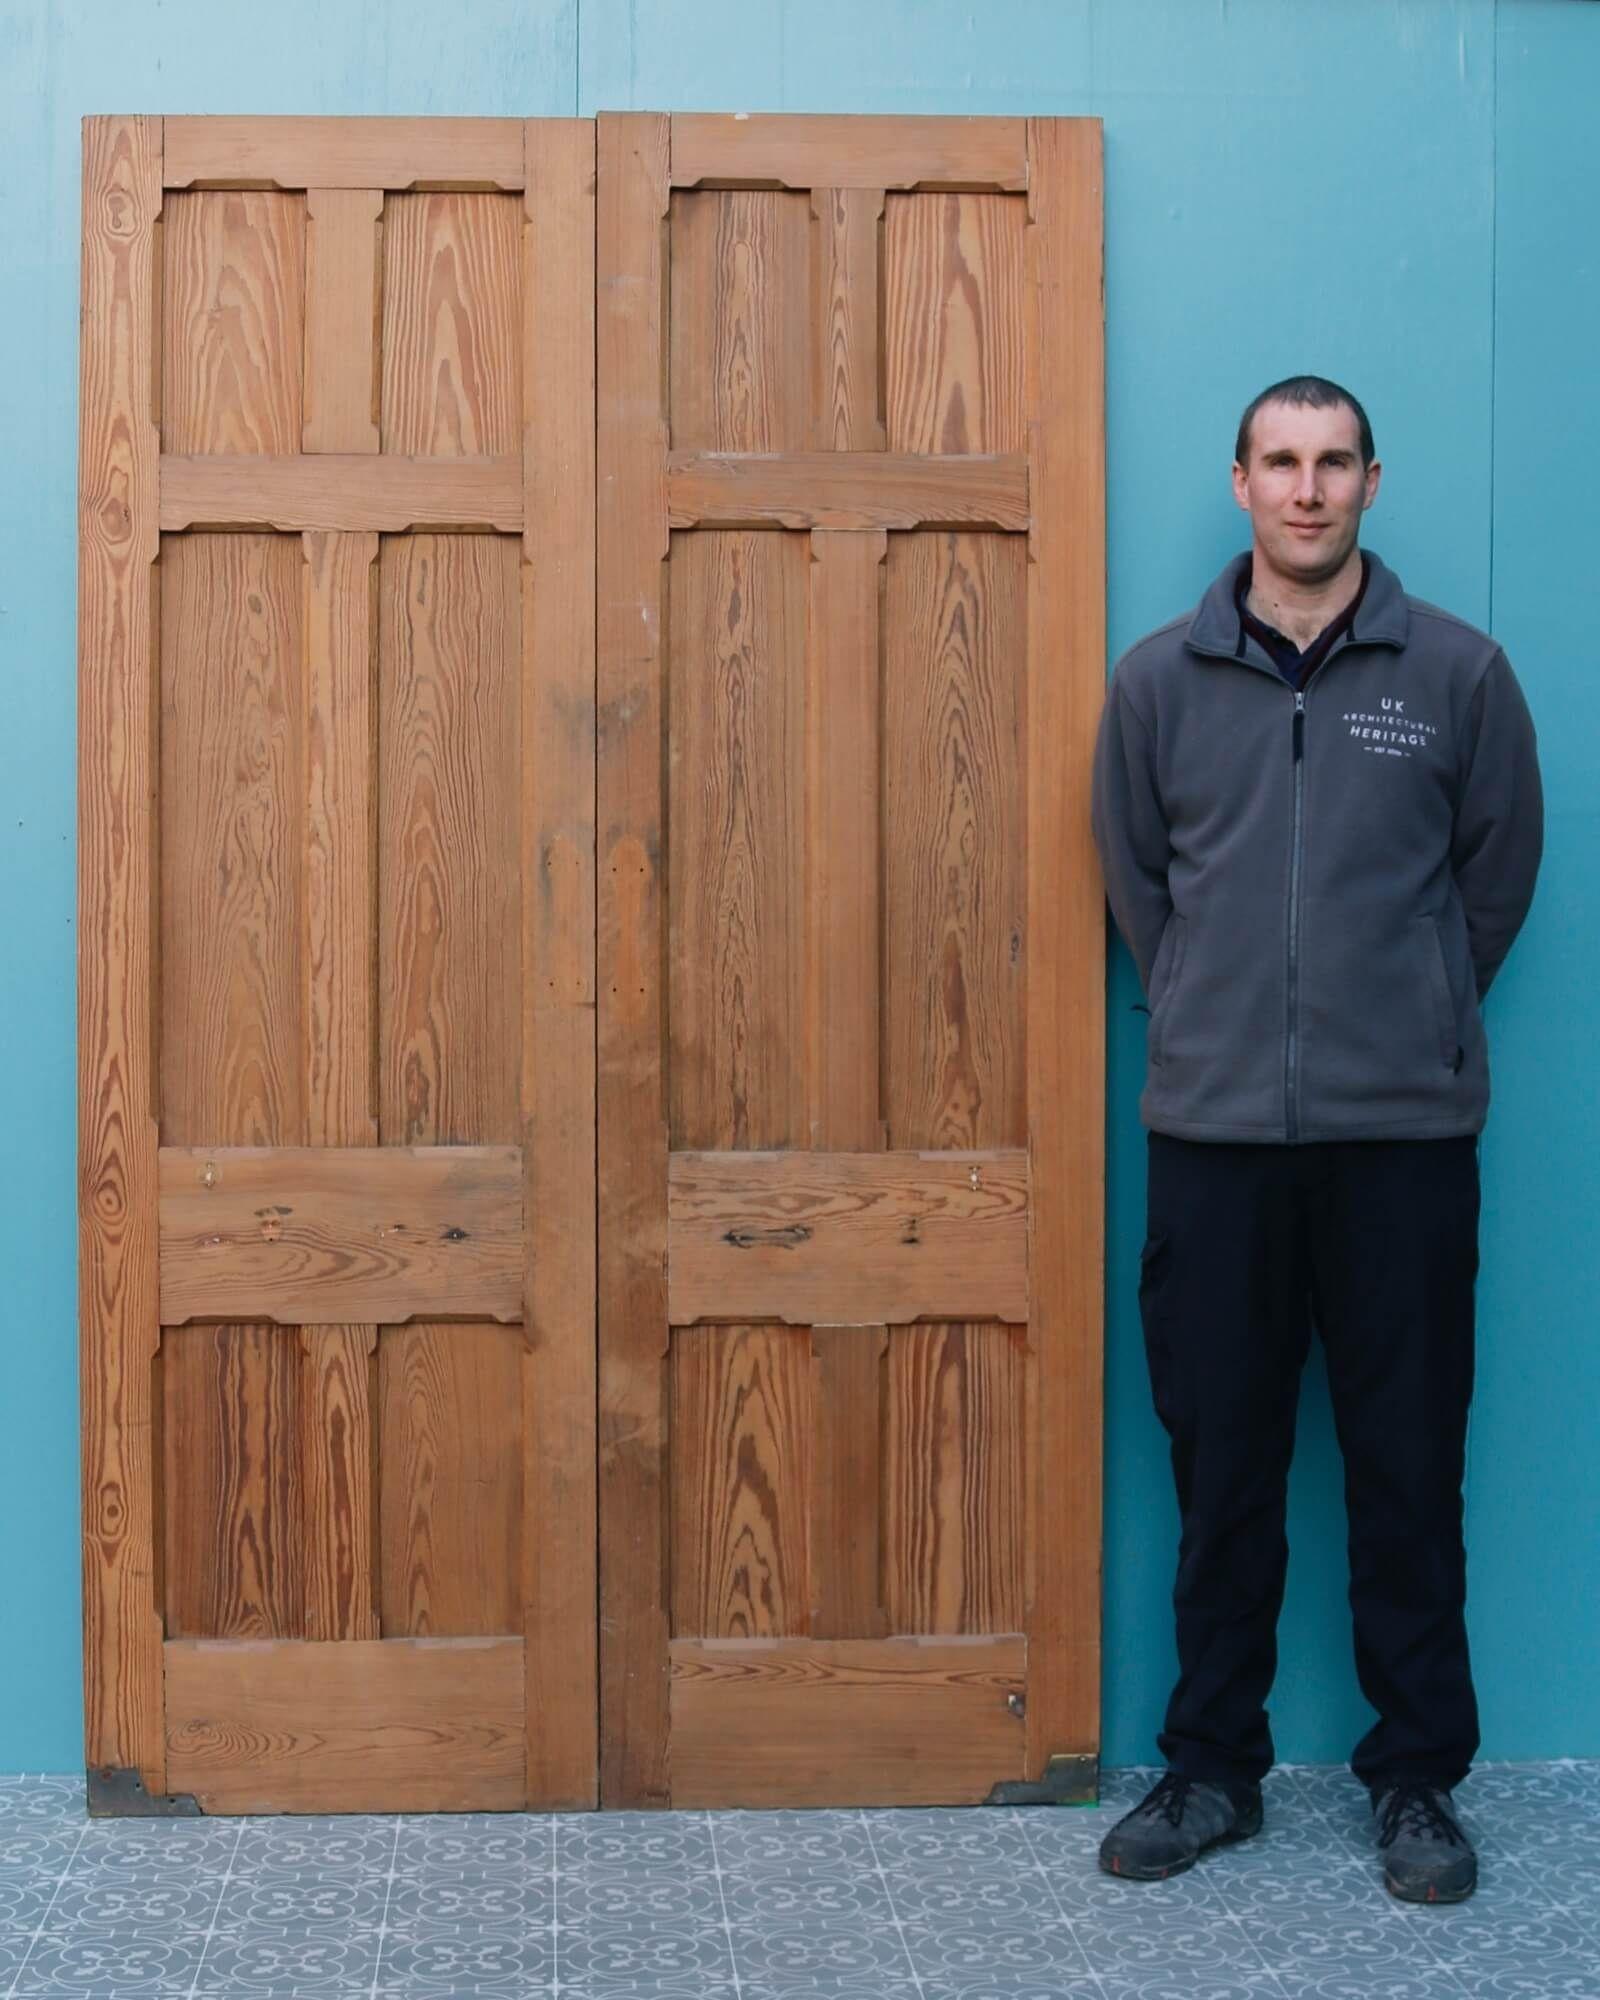 An elegant set of reclaimed internal double doors sourced from an English chapel, circa 1890. These antique doors are made from sturdy pitch pine and have a characteristic warm wood colour and grain that make for a beautiful pair of dividing doors